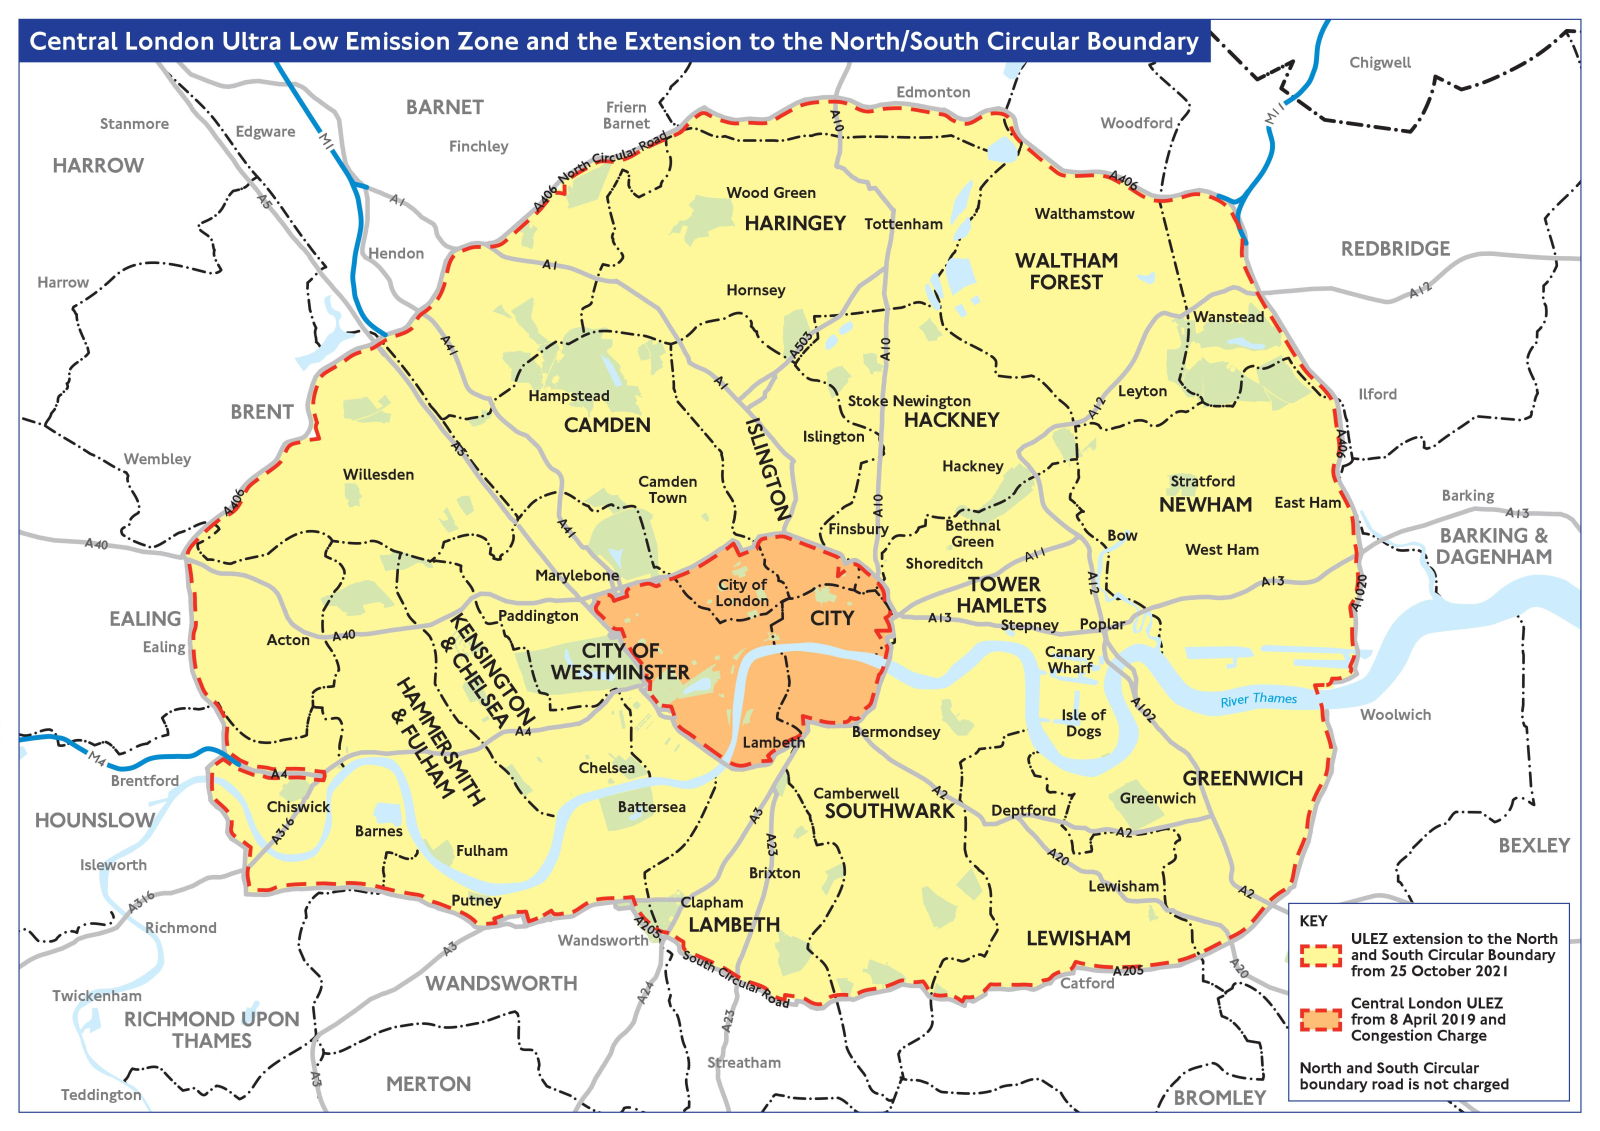 London's Ultra Low Emissions Zone for drivers